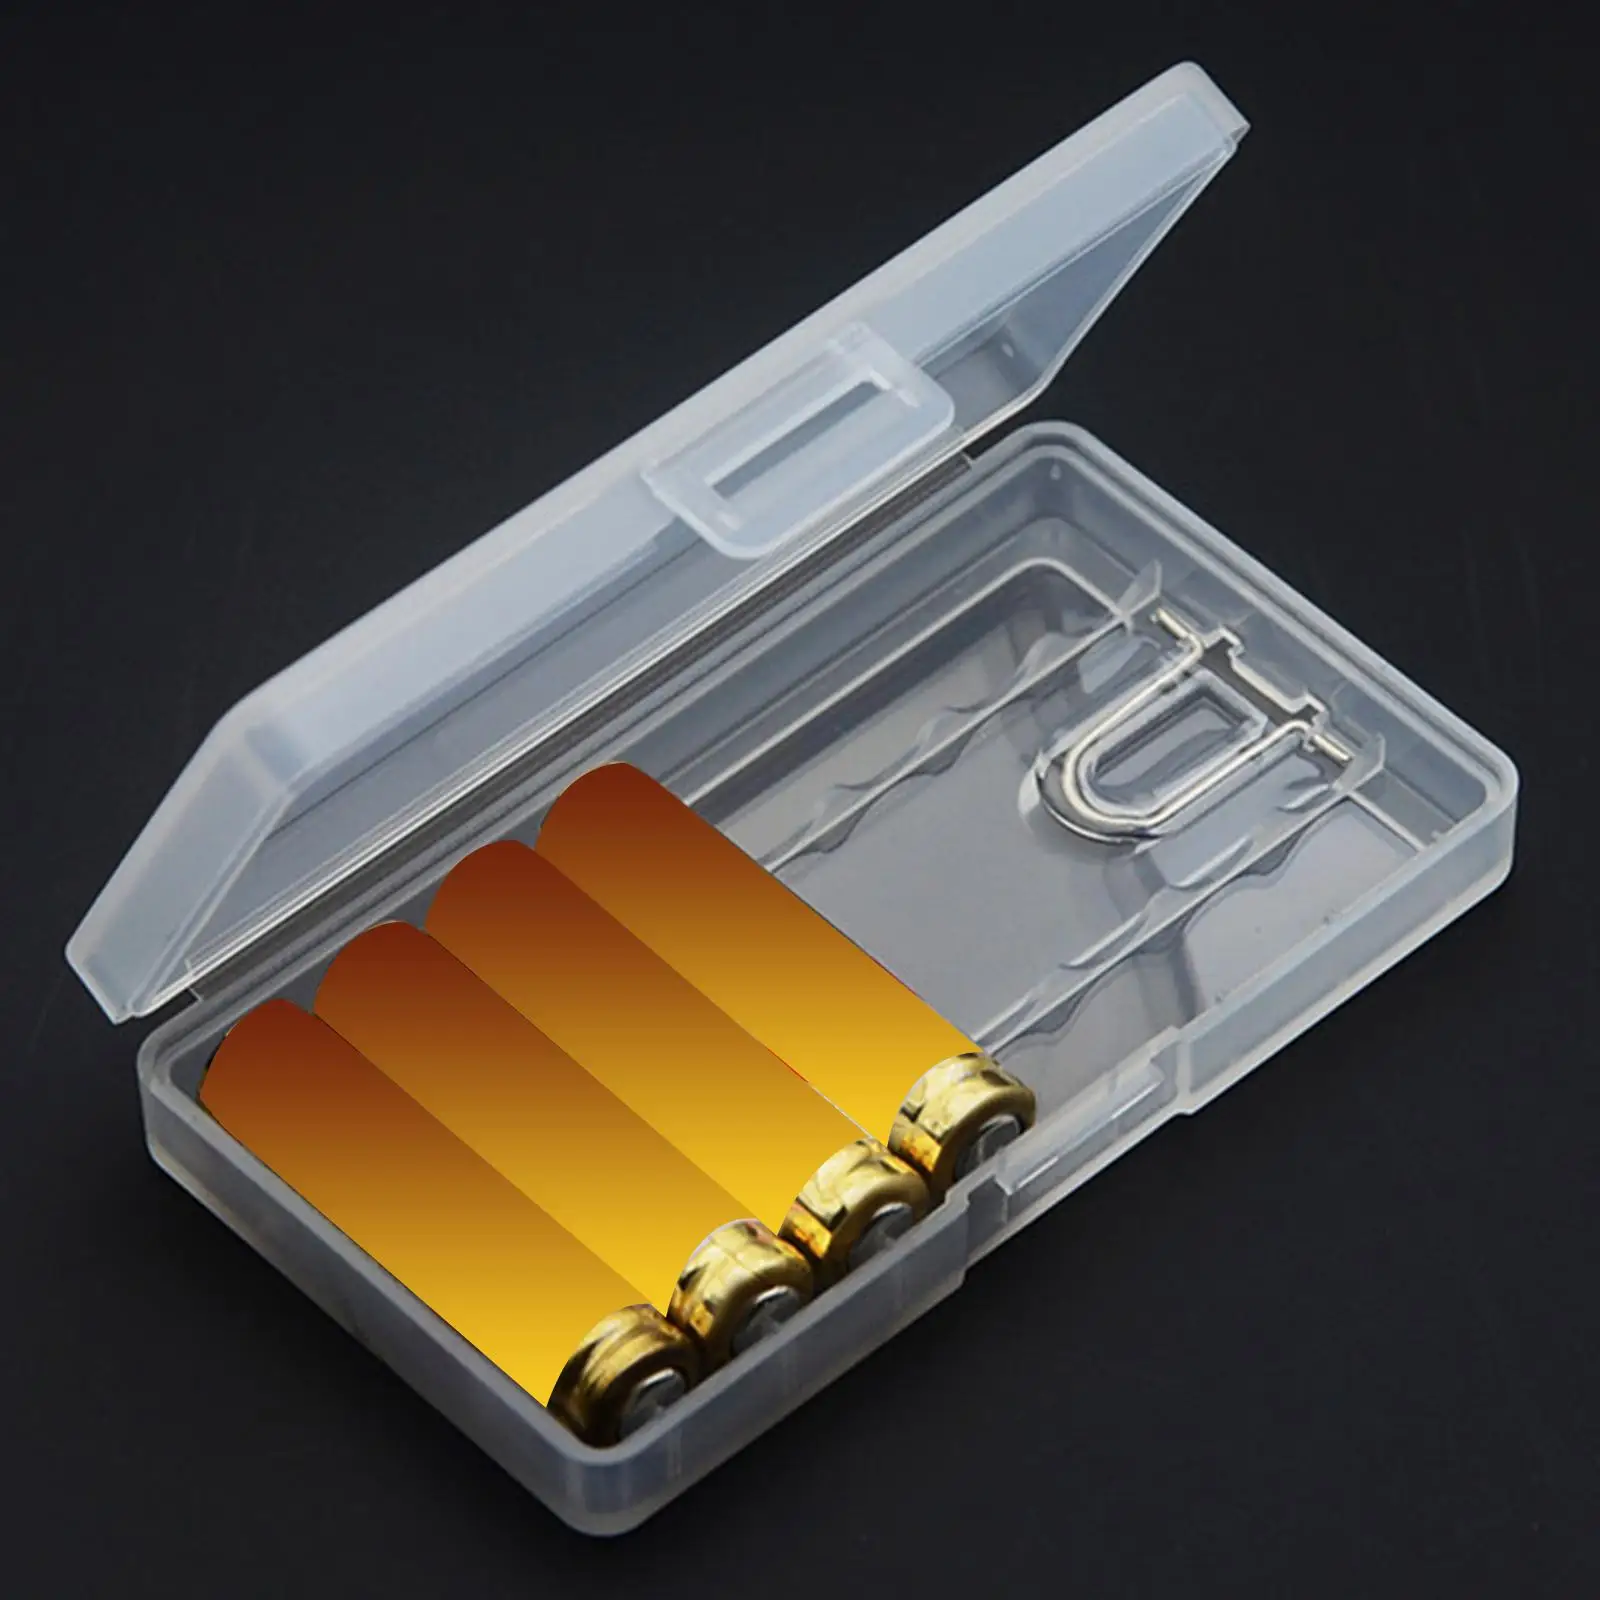 Battery Storage Case Holds 8 AAA Batteries Clear Color Practical Durable Portable Organizer Holder Box Protective Container